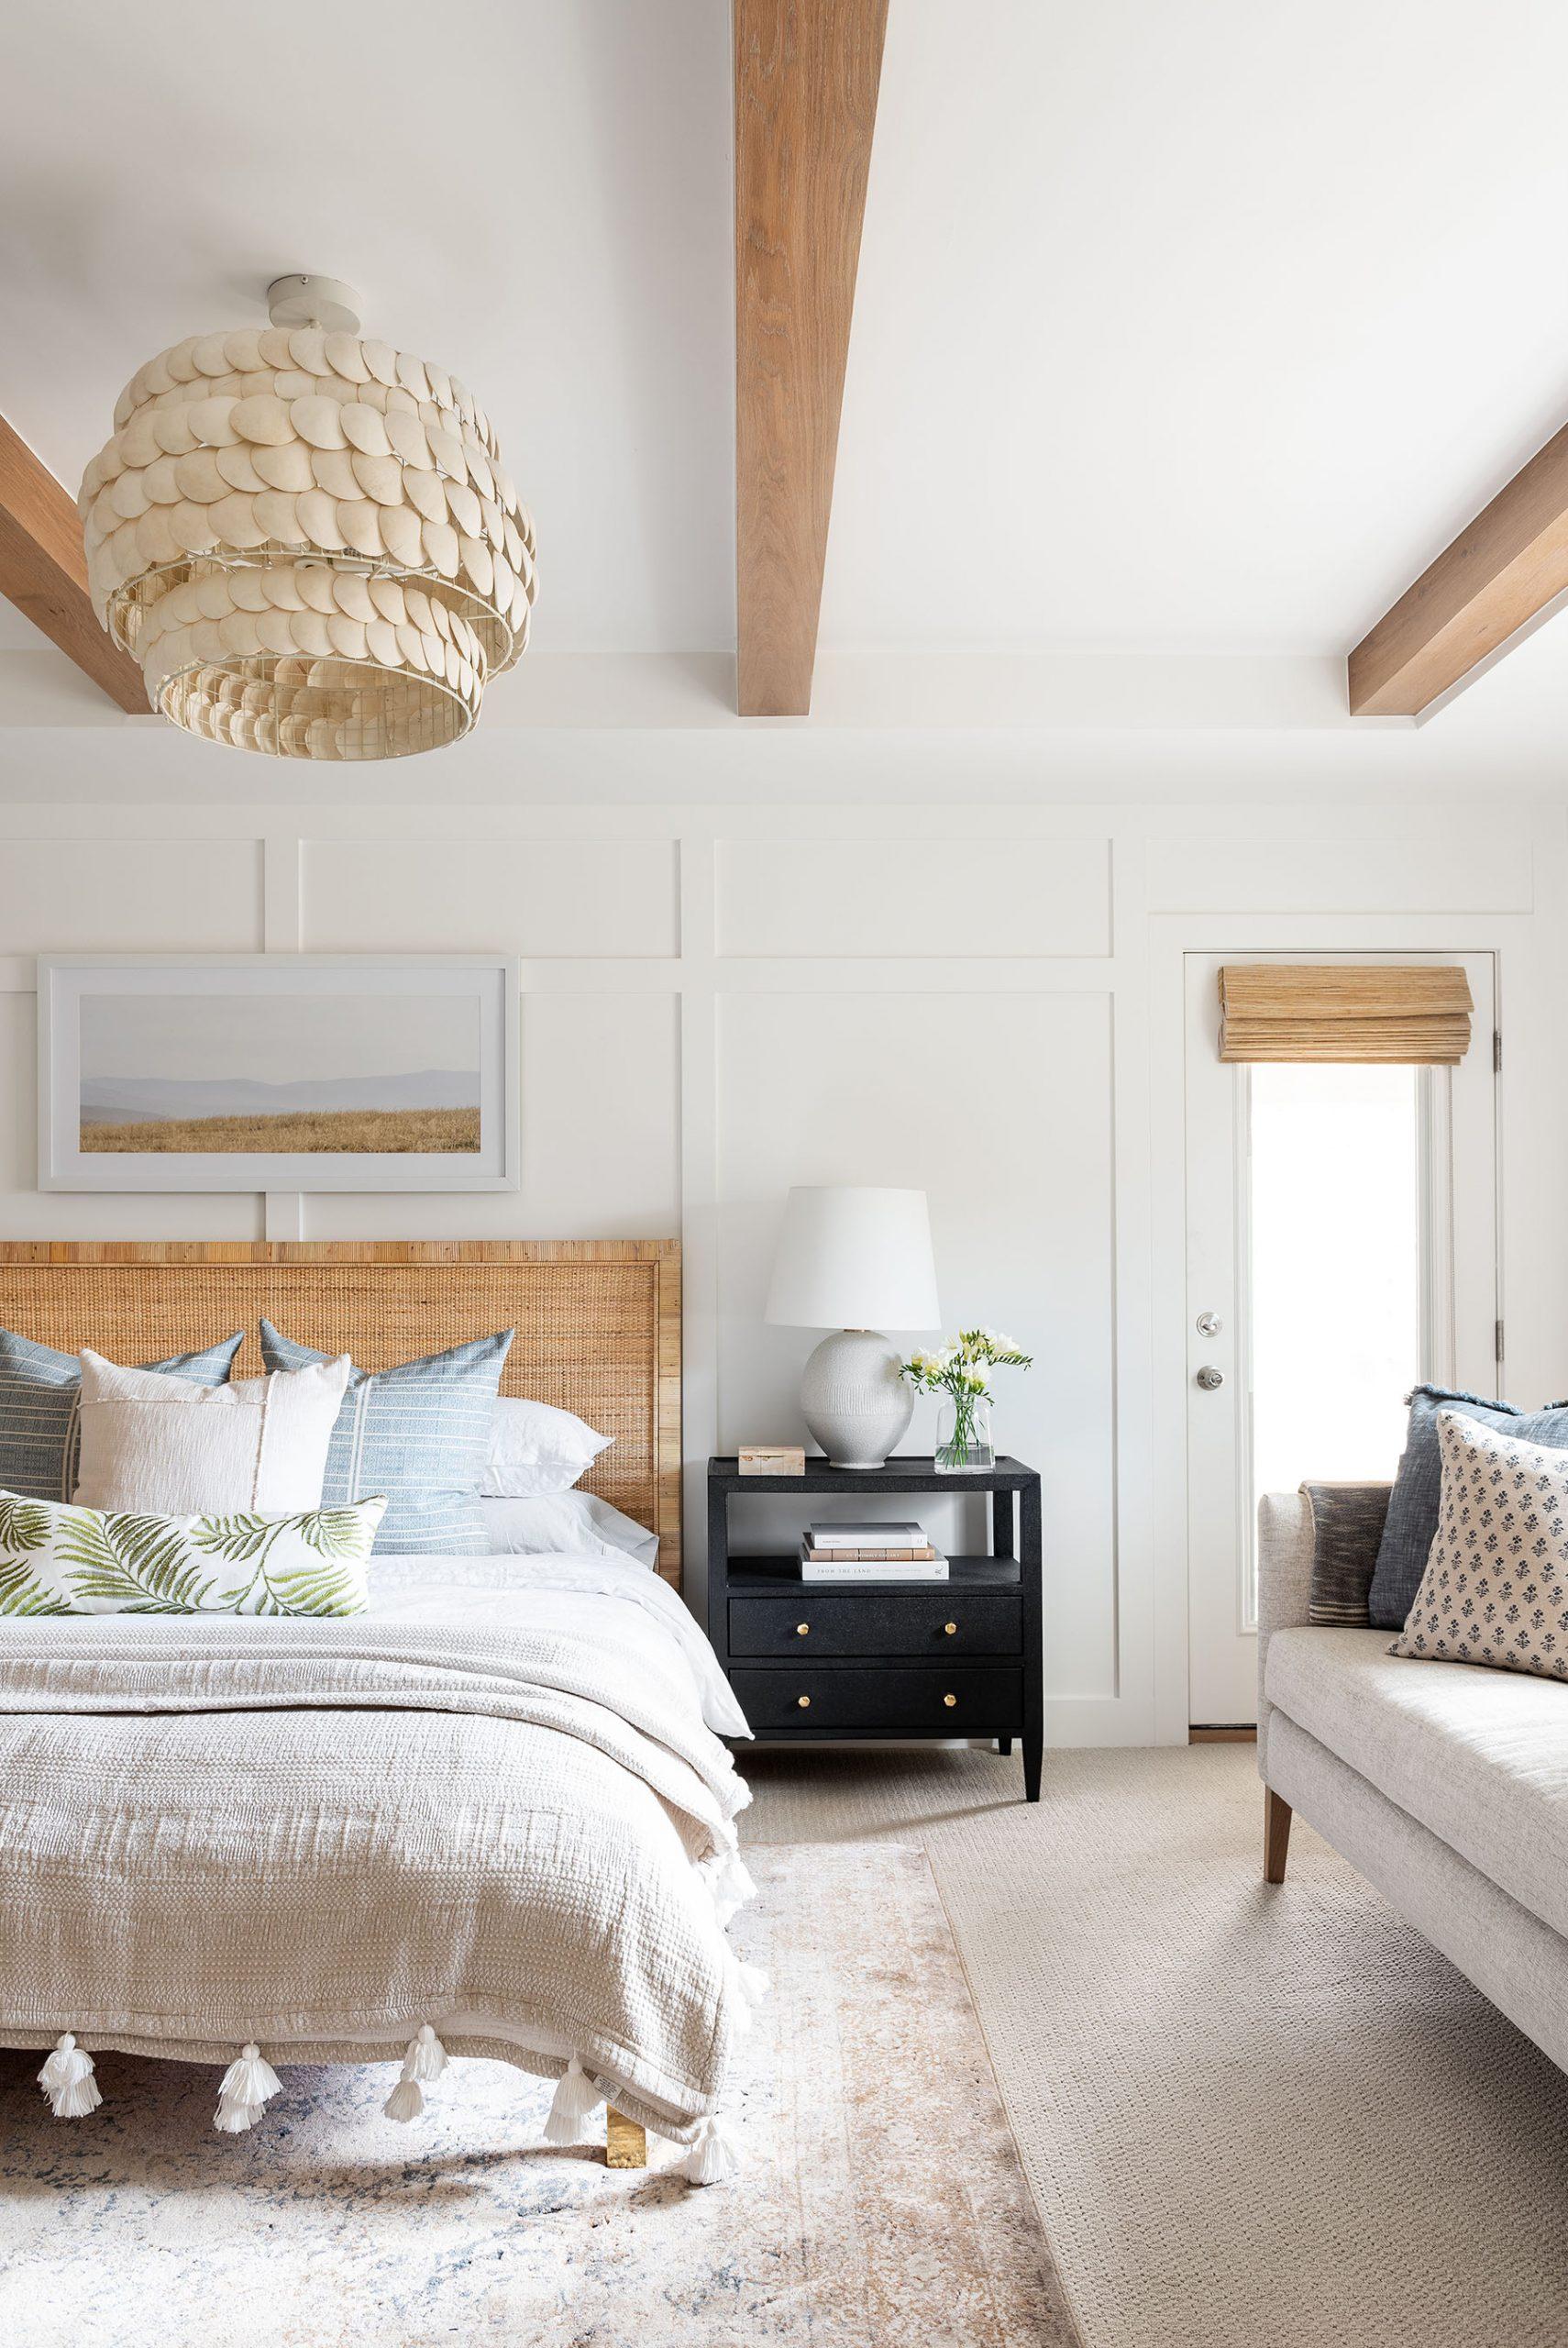 Studio McGee Bedroom with bamboo shades, scallop light fixture